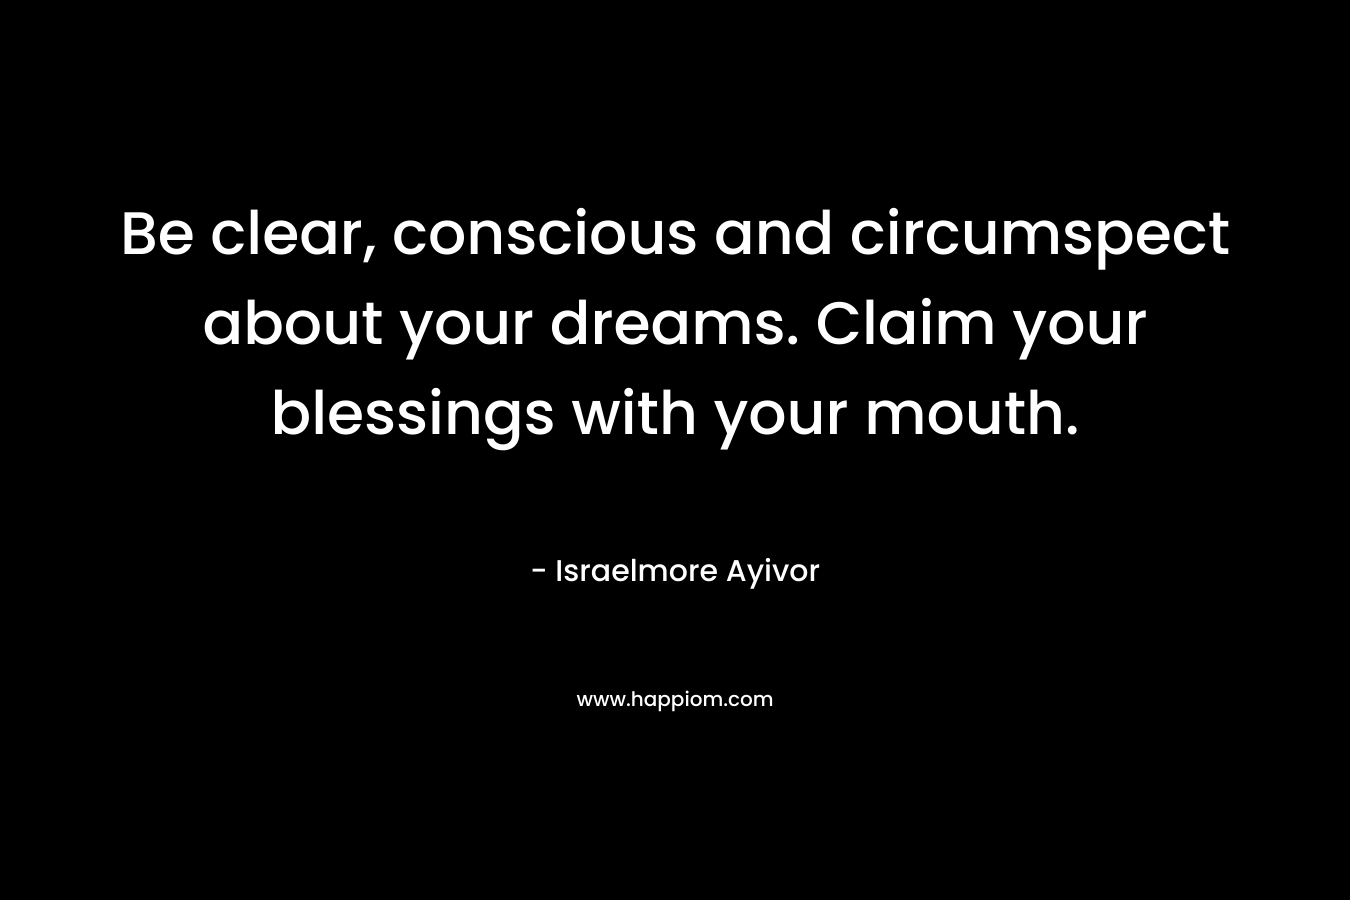 Be clear, conscious and circumspect about your dreams. Claim your blessings with your mouth.